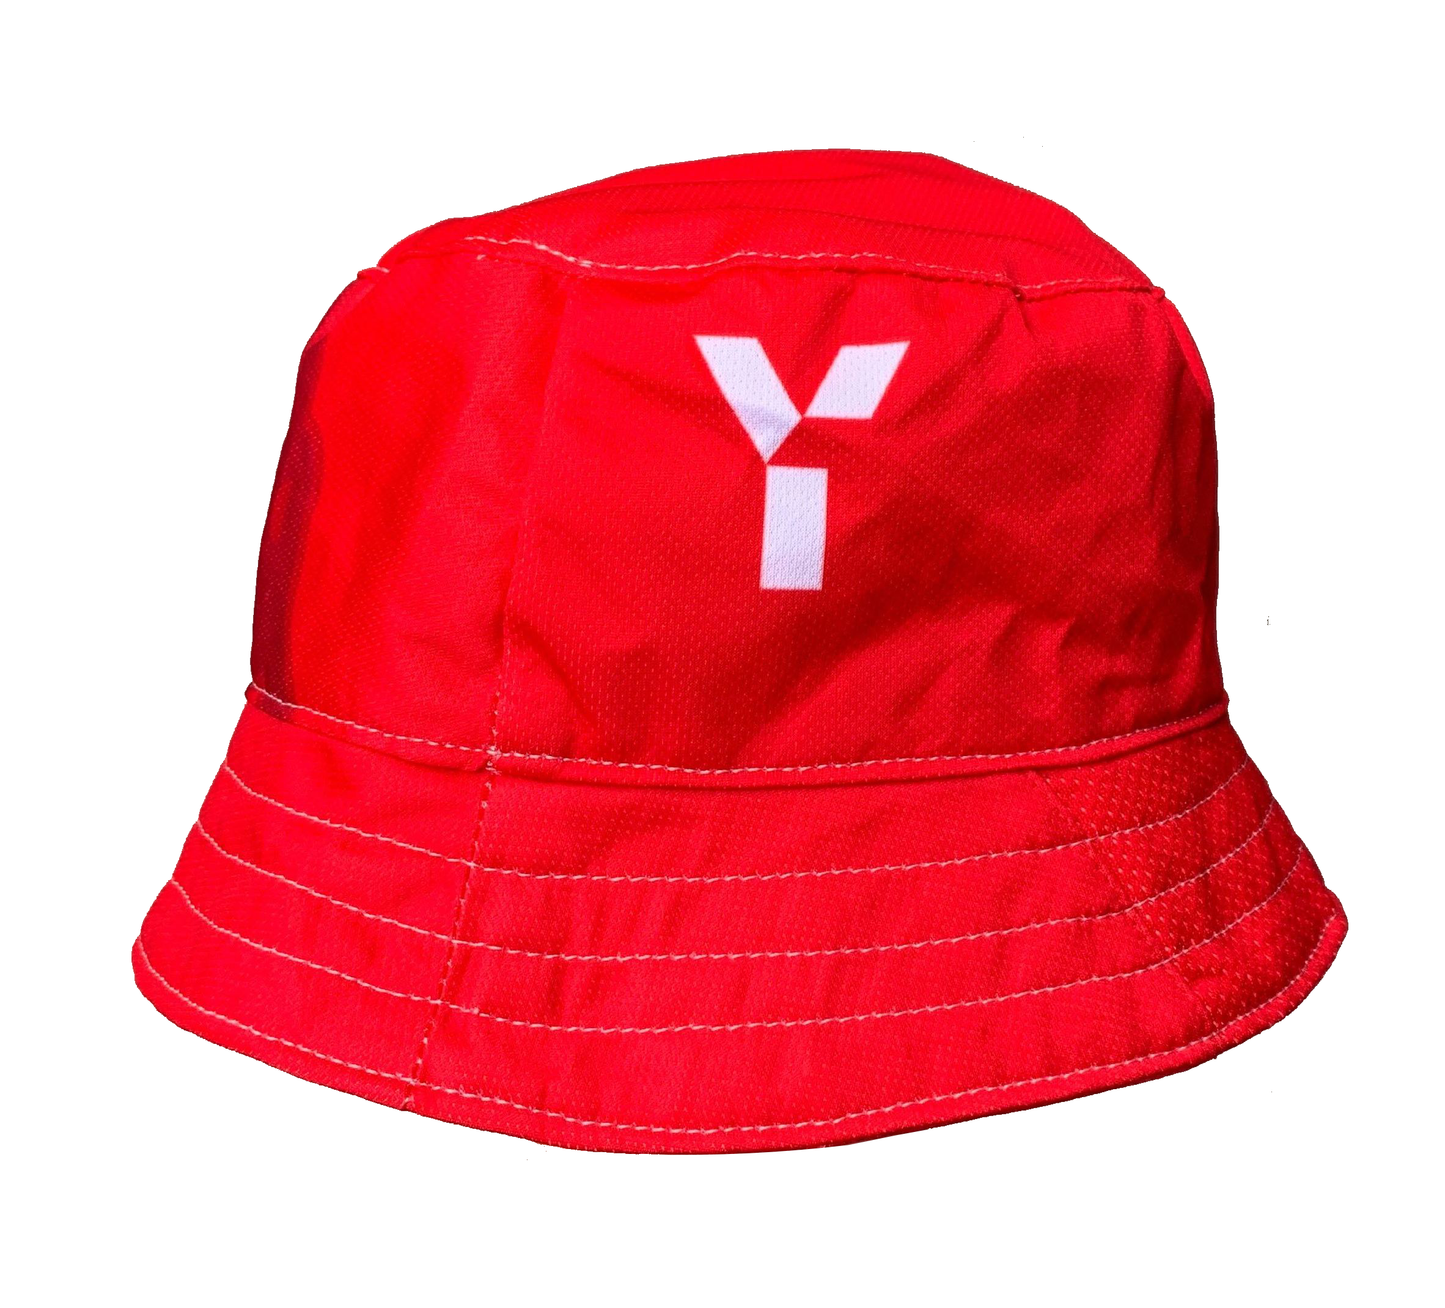 Upcycled Bucket Hat - Red